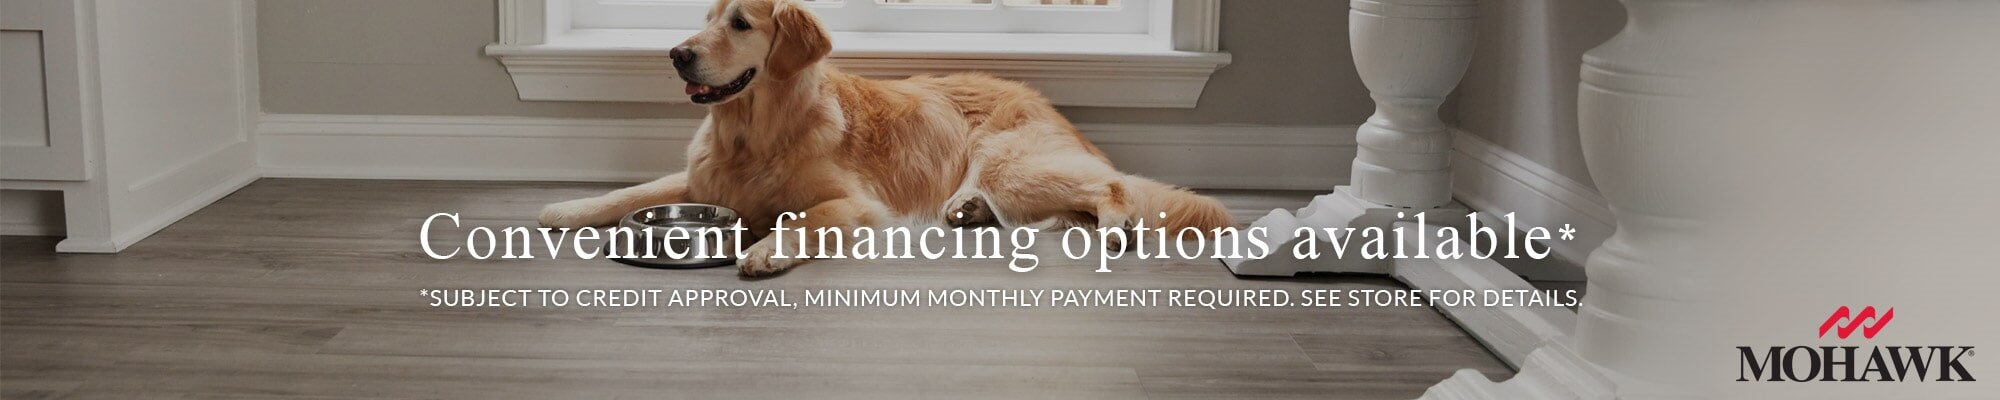 Convenient financing options available from Troy Flooring Center